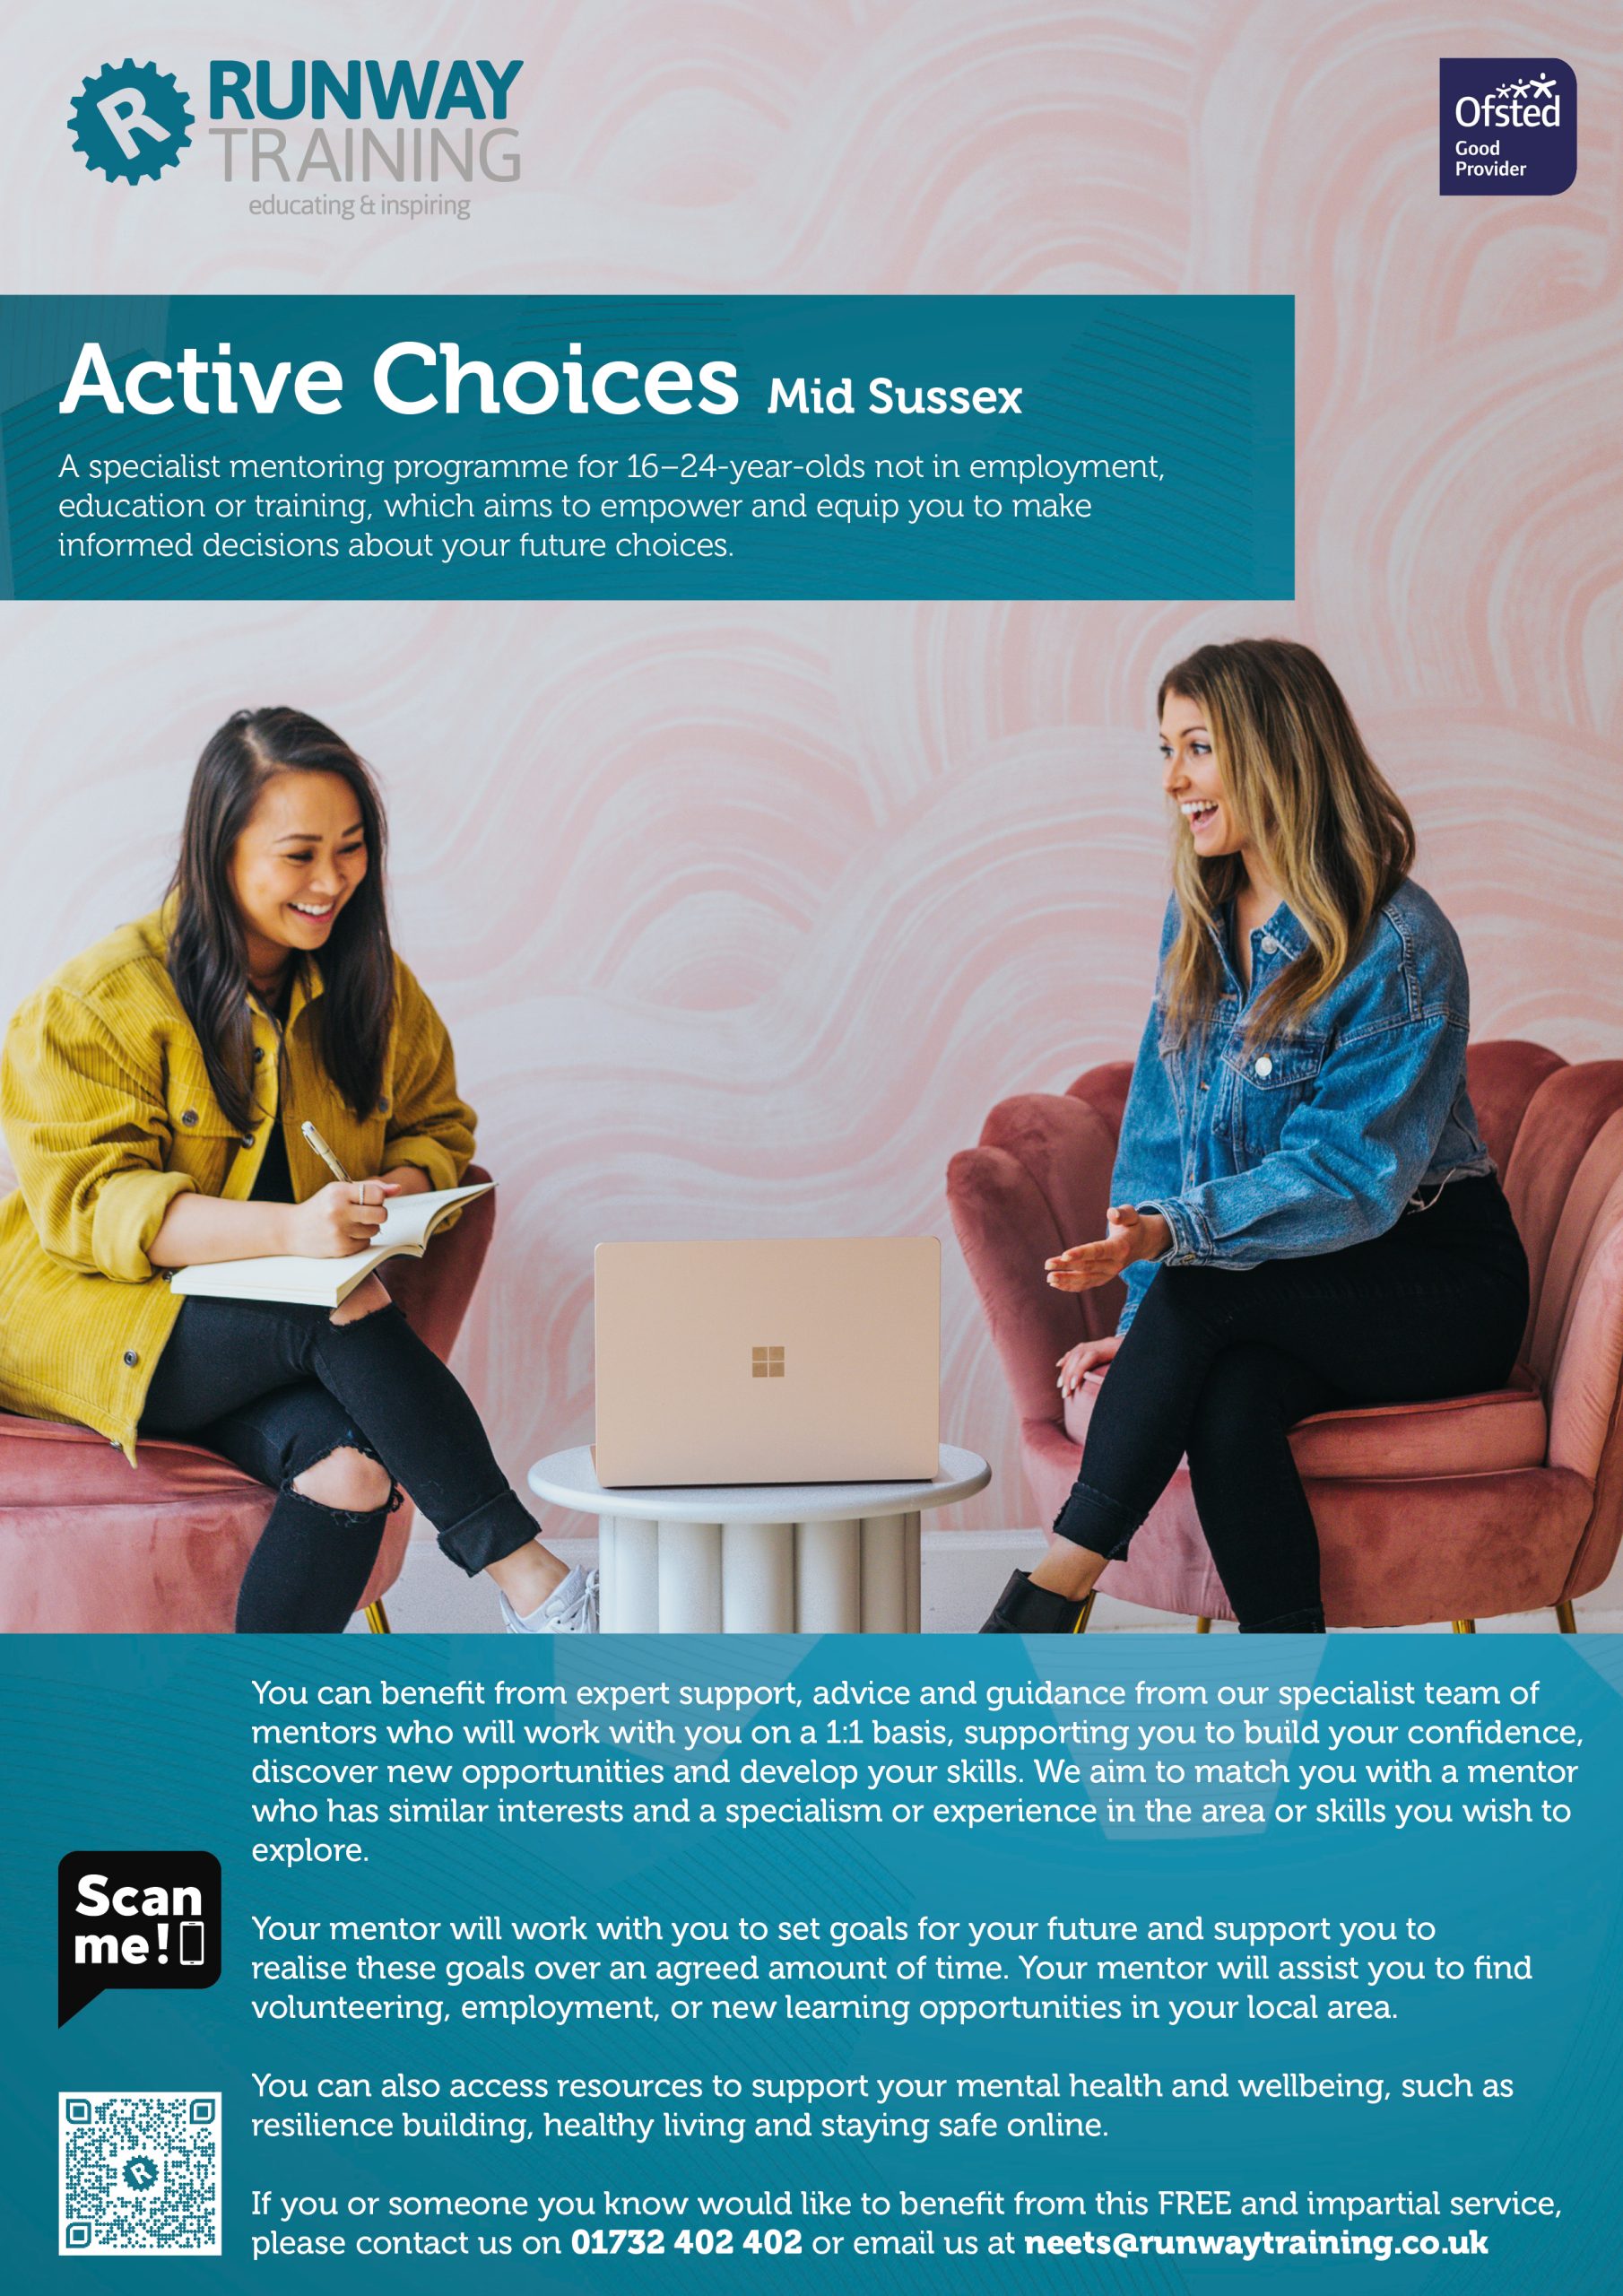 A4 Active Choices Mid Sussex